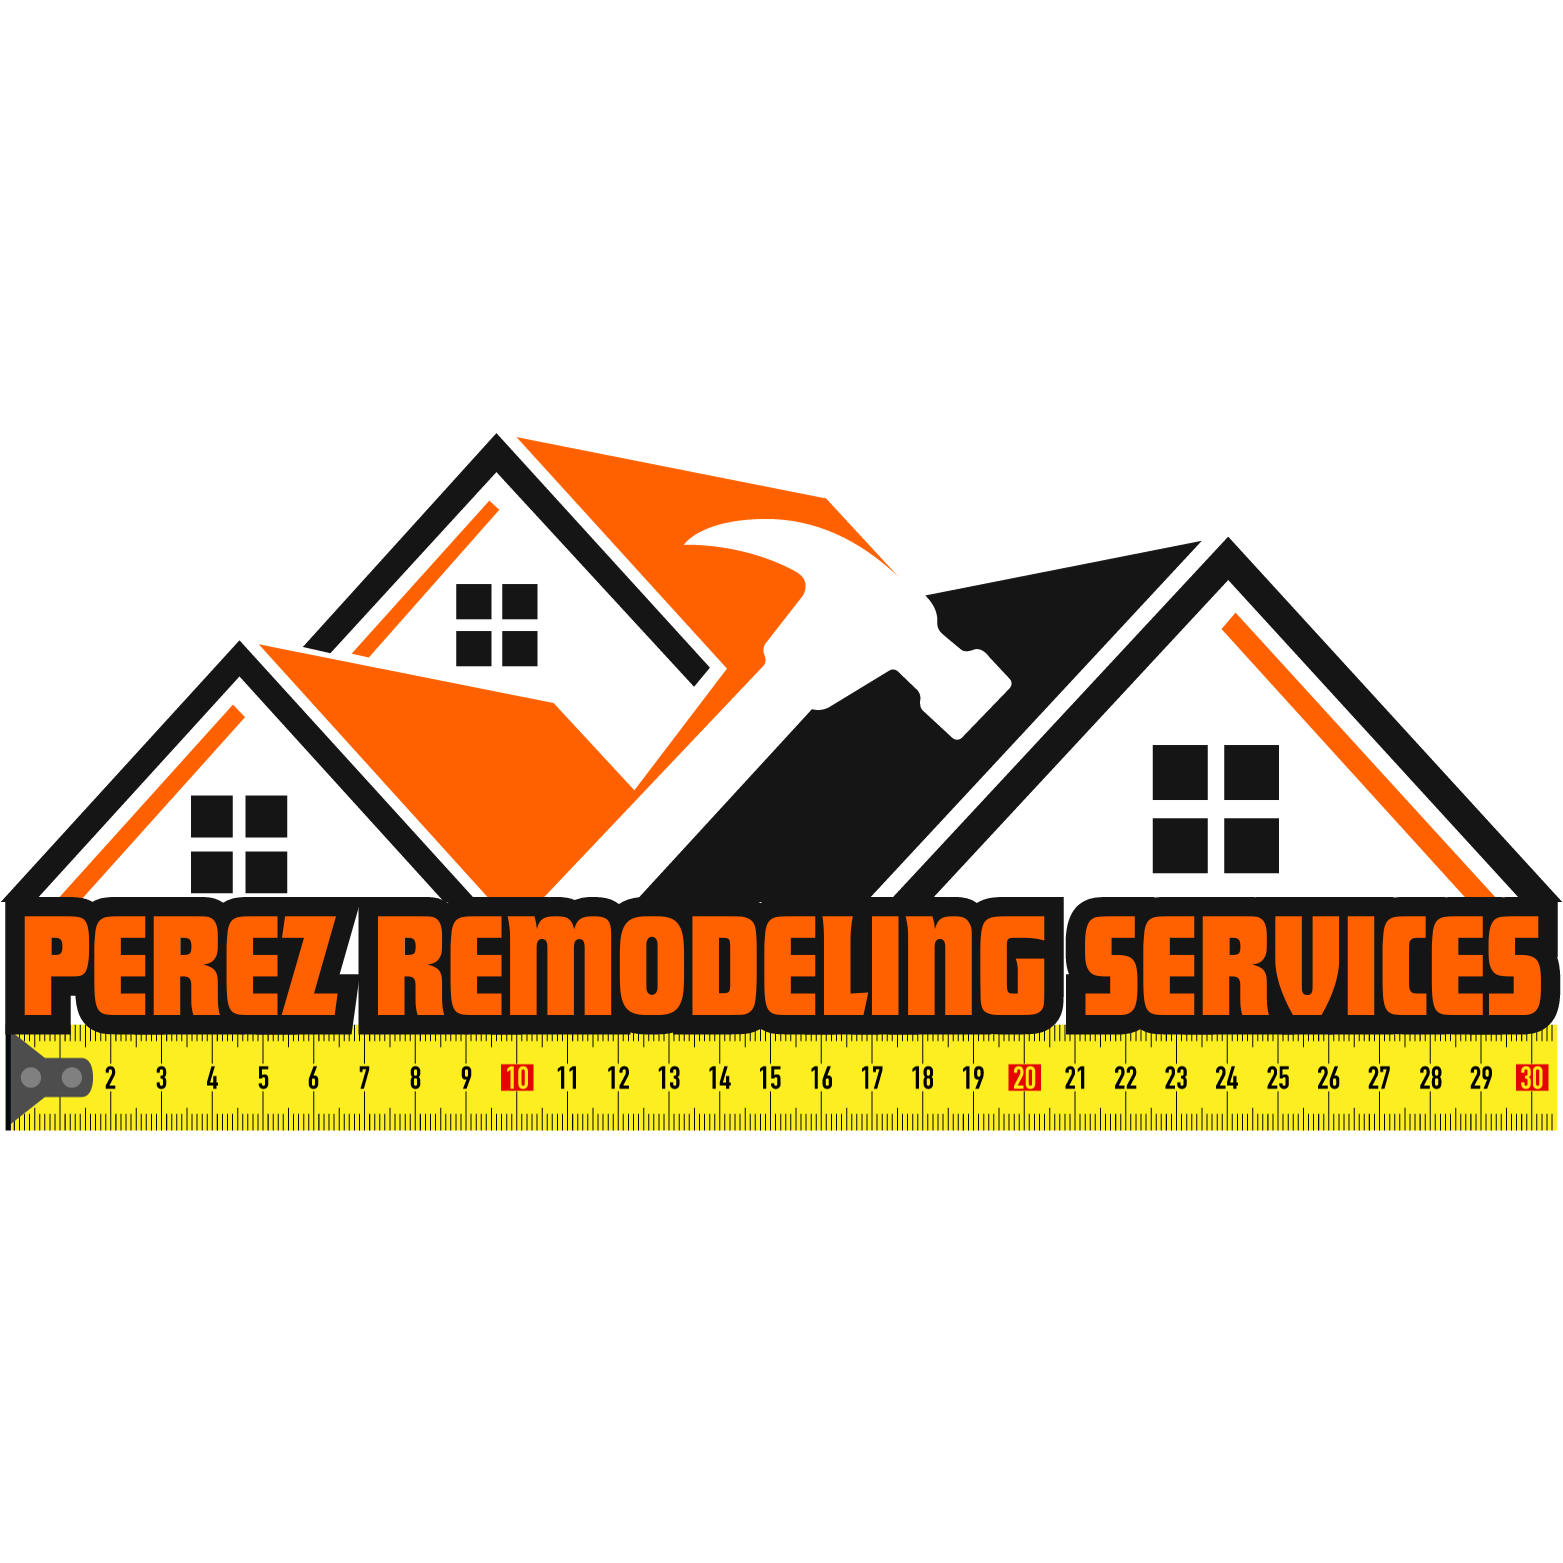 Perez Remodeling Services